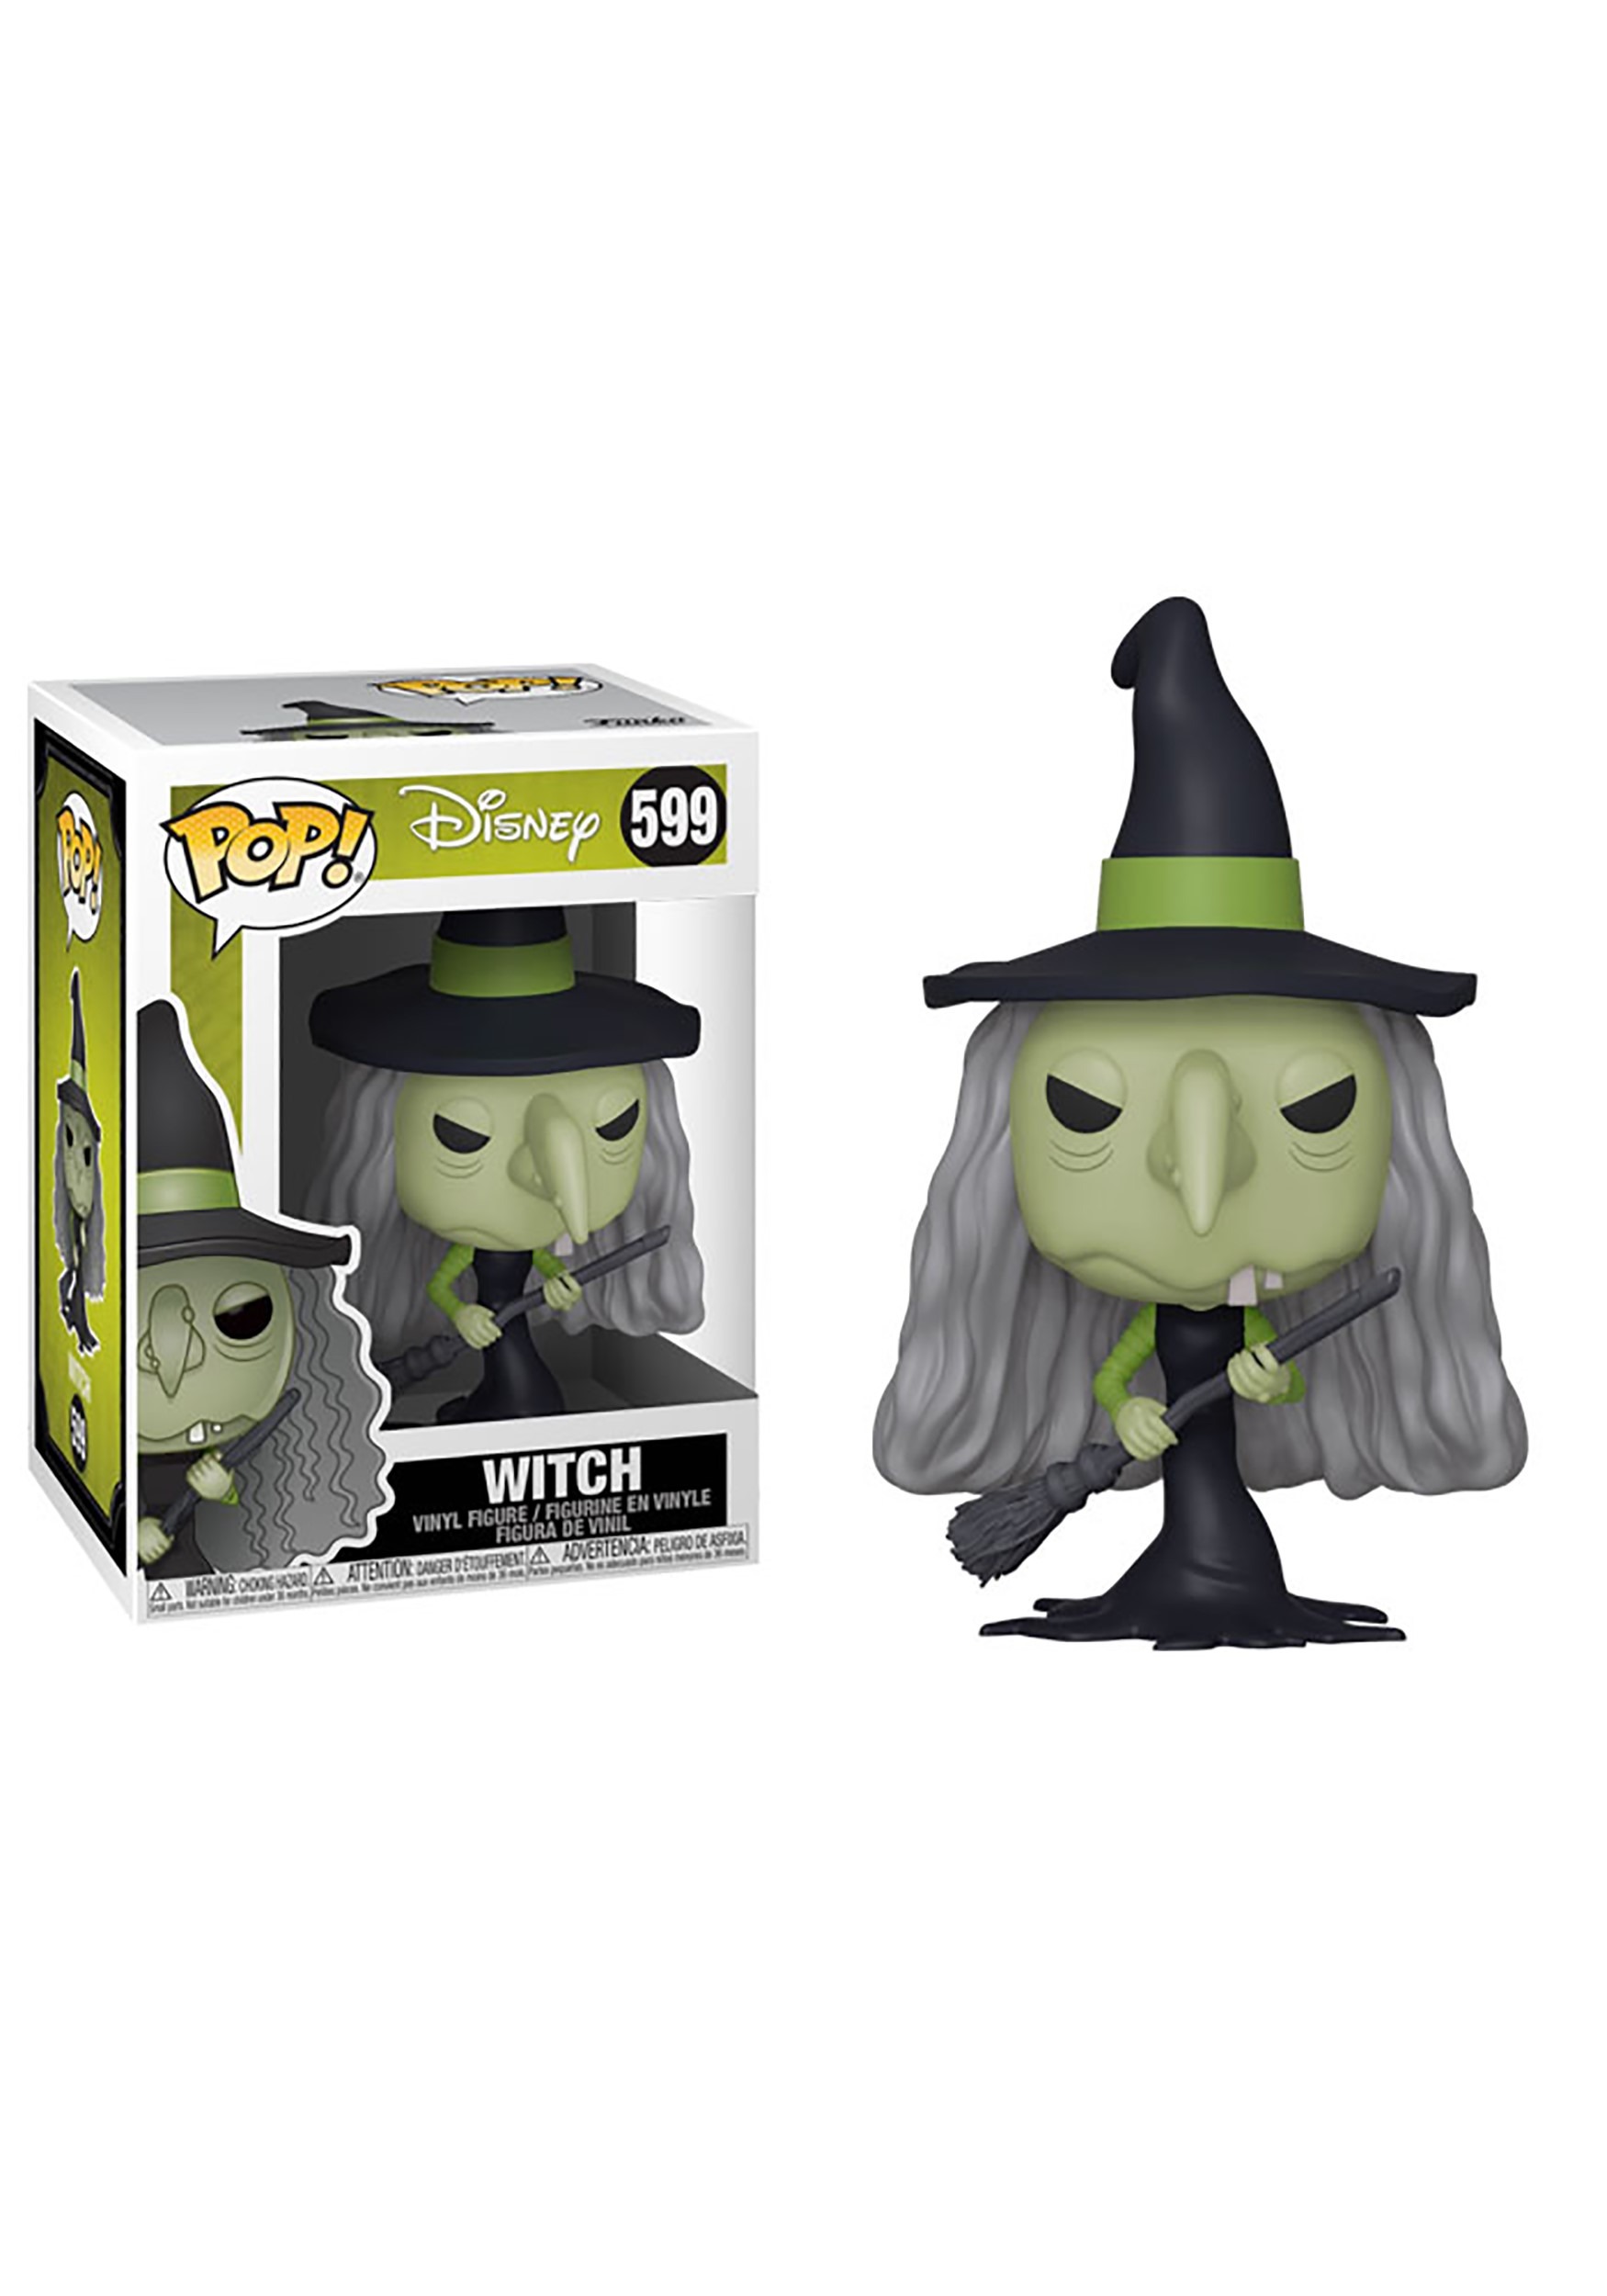 Nightmare Before Christmas - Witch Pop! Disney